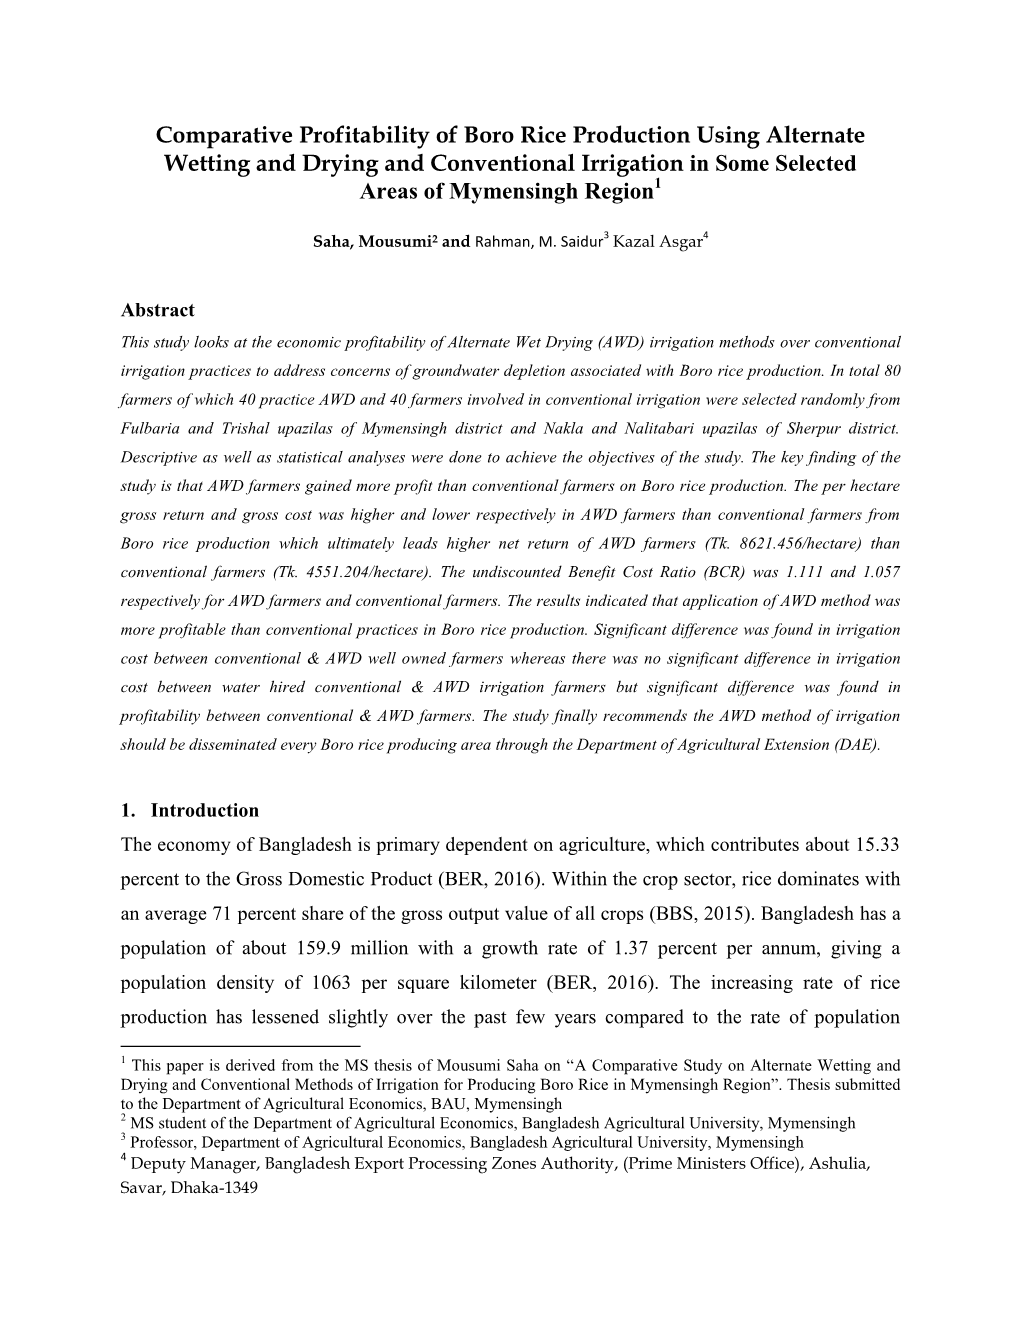 Comparative Profitability of Boro Rice Production Using Alternate Wetting and Drying and Conventional Irrigation in Some Selected Areas of Mymensingh Region1